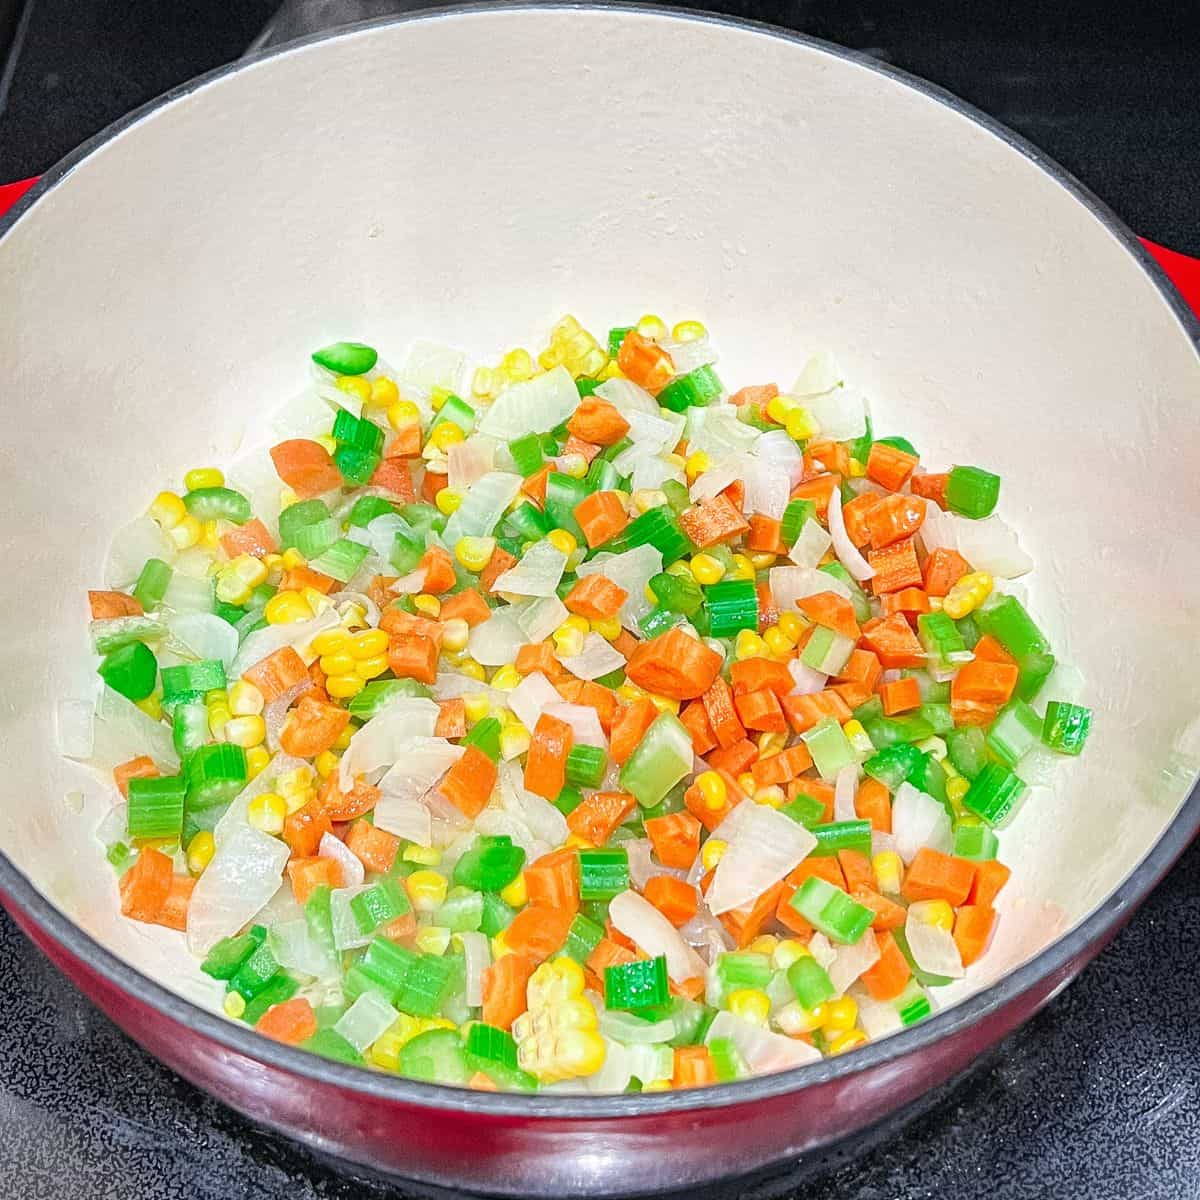 Cooking carrots, celery, and corn in a dutch oven.